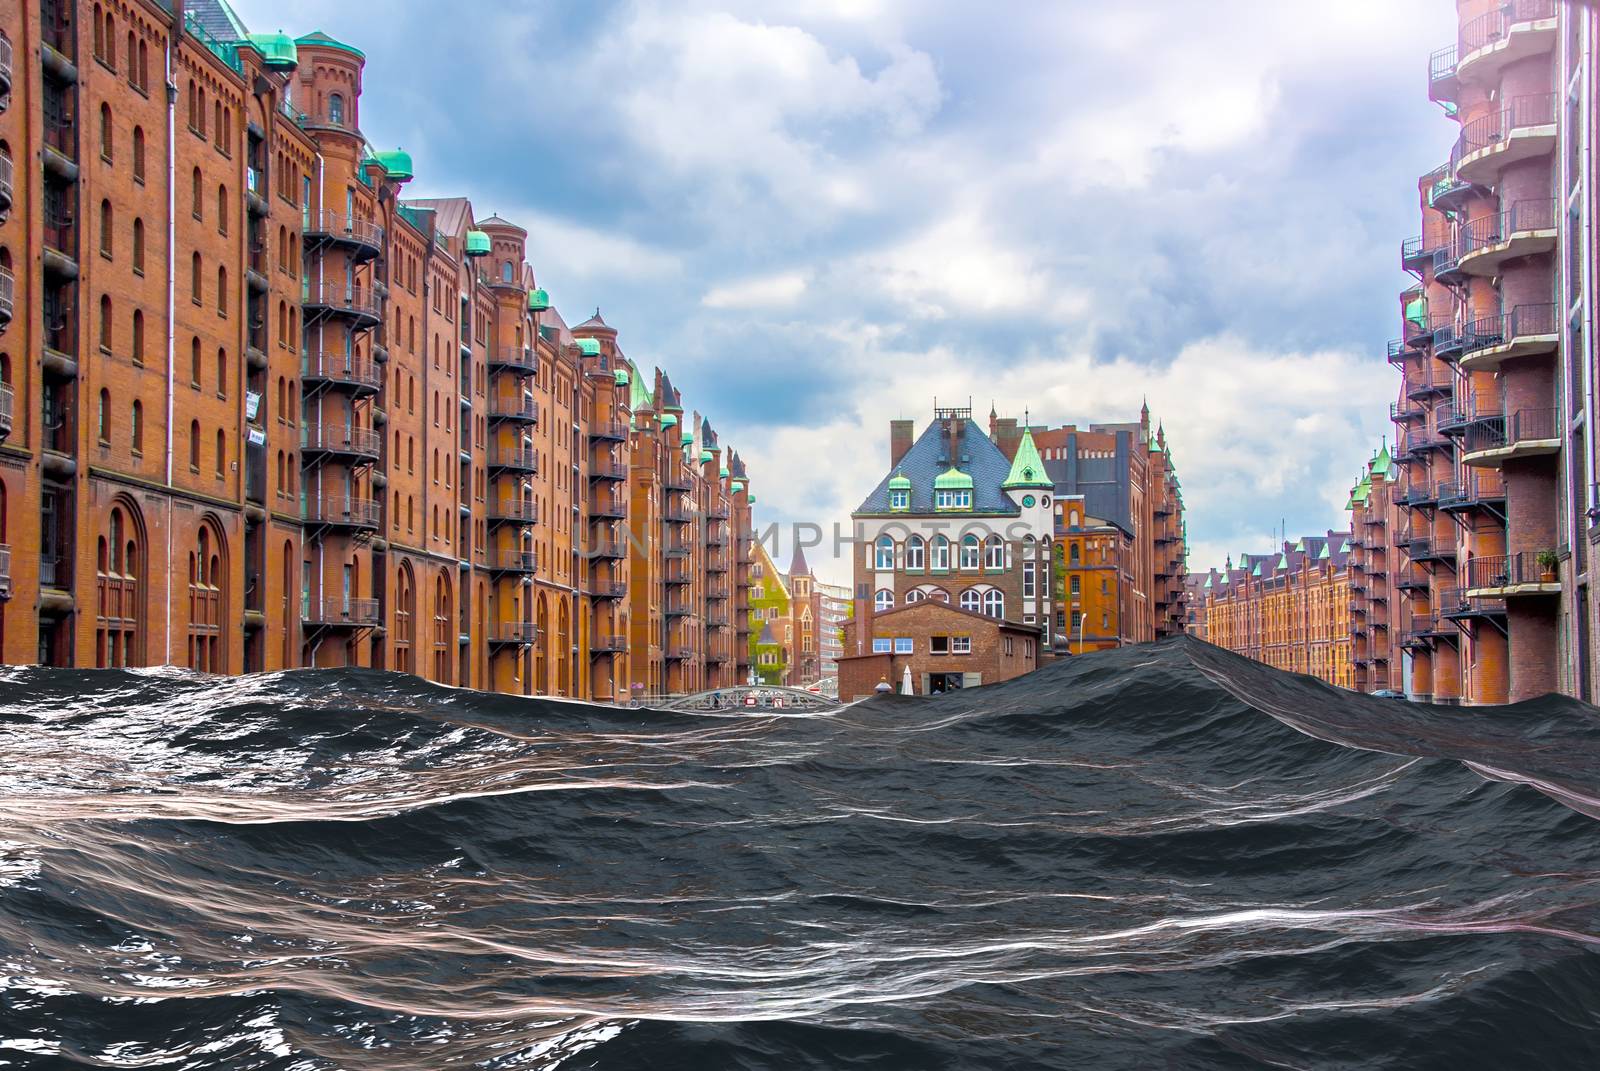 Hamburg in the Future by Fr@nk